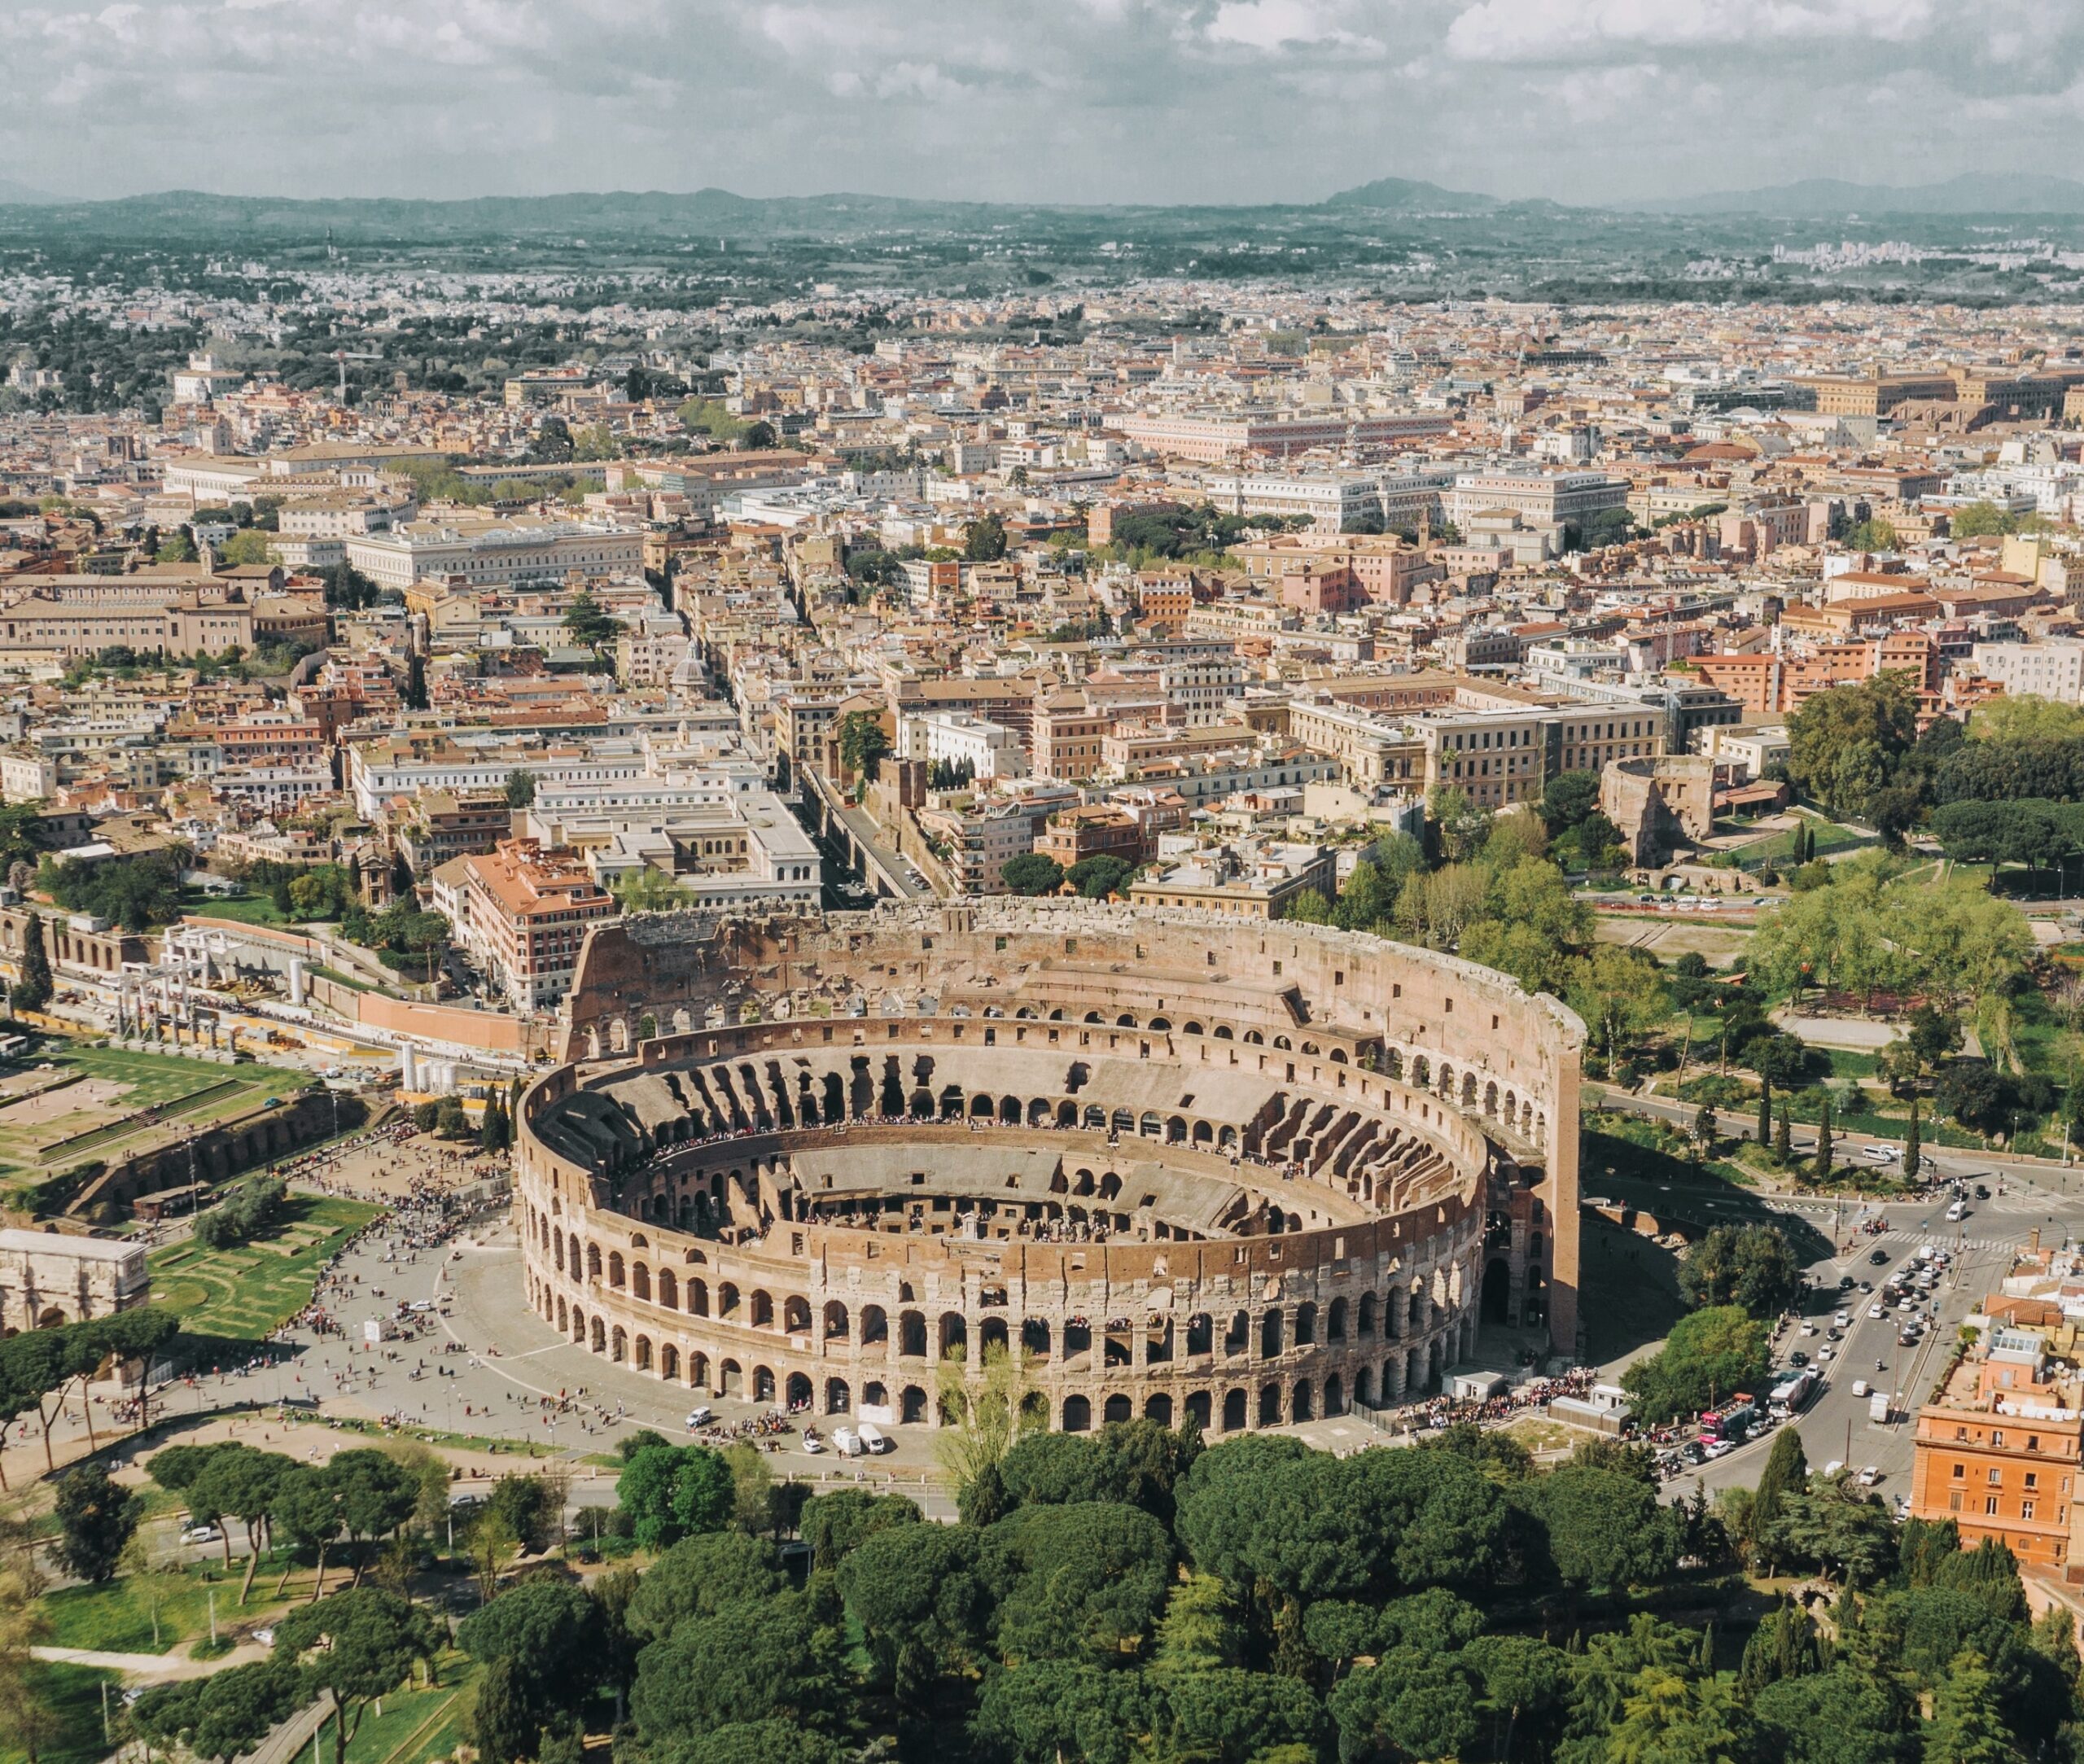 Rome is a wildly popular city in Italy, which is a top option for Europe travelers. 
Pictured: the iconic Colosseum in Rom on a bright day